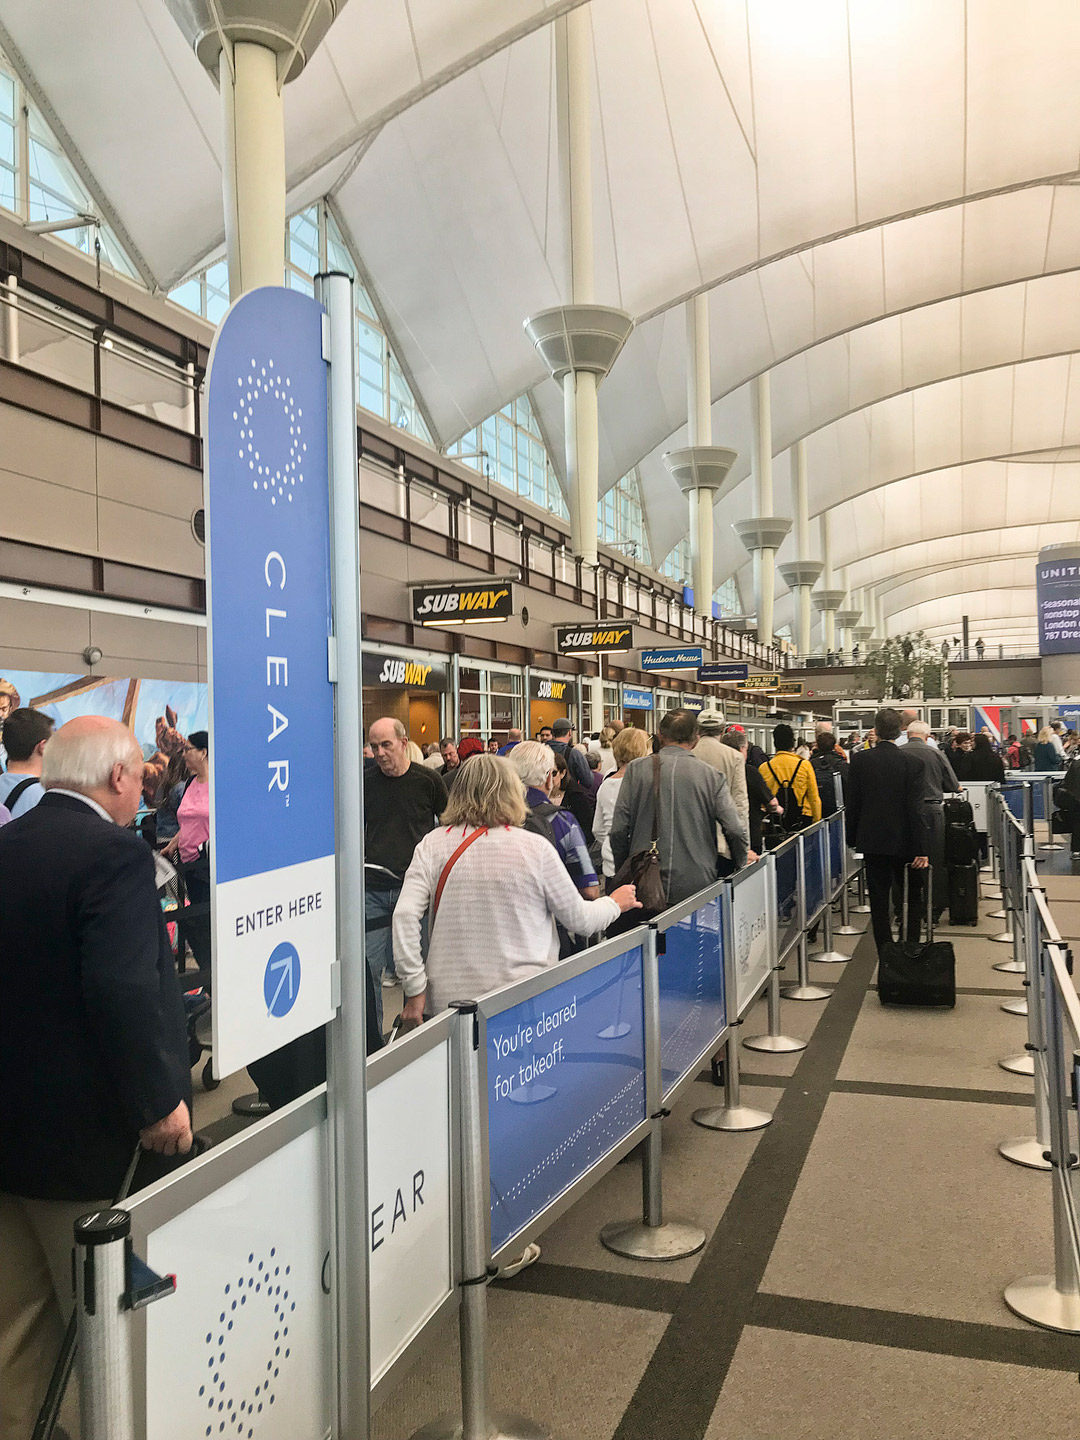 Thinking about getting Clear? Save this pin and click through to see our guide on how to breeze through airport security like a boss the differences between Clearme vs TSA Precheck, how and where to apply for TSA Precheck and Clear, cost, and more // Local Adventurer #clear #airport #traveltips #localadventurer #travel #travelpro #travelblogger